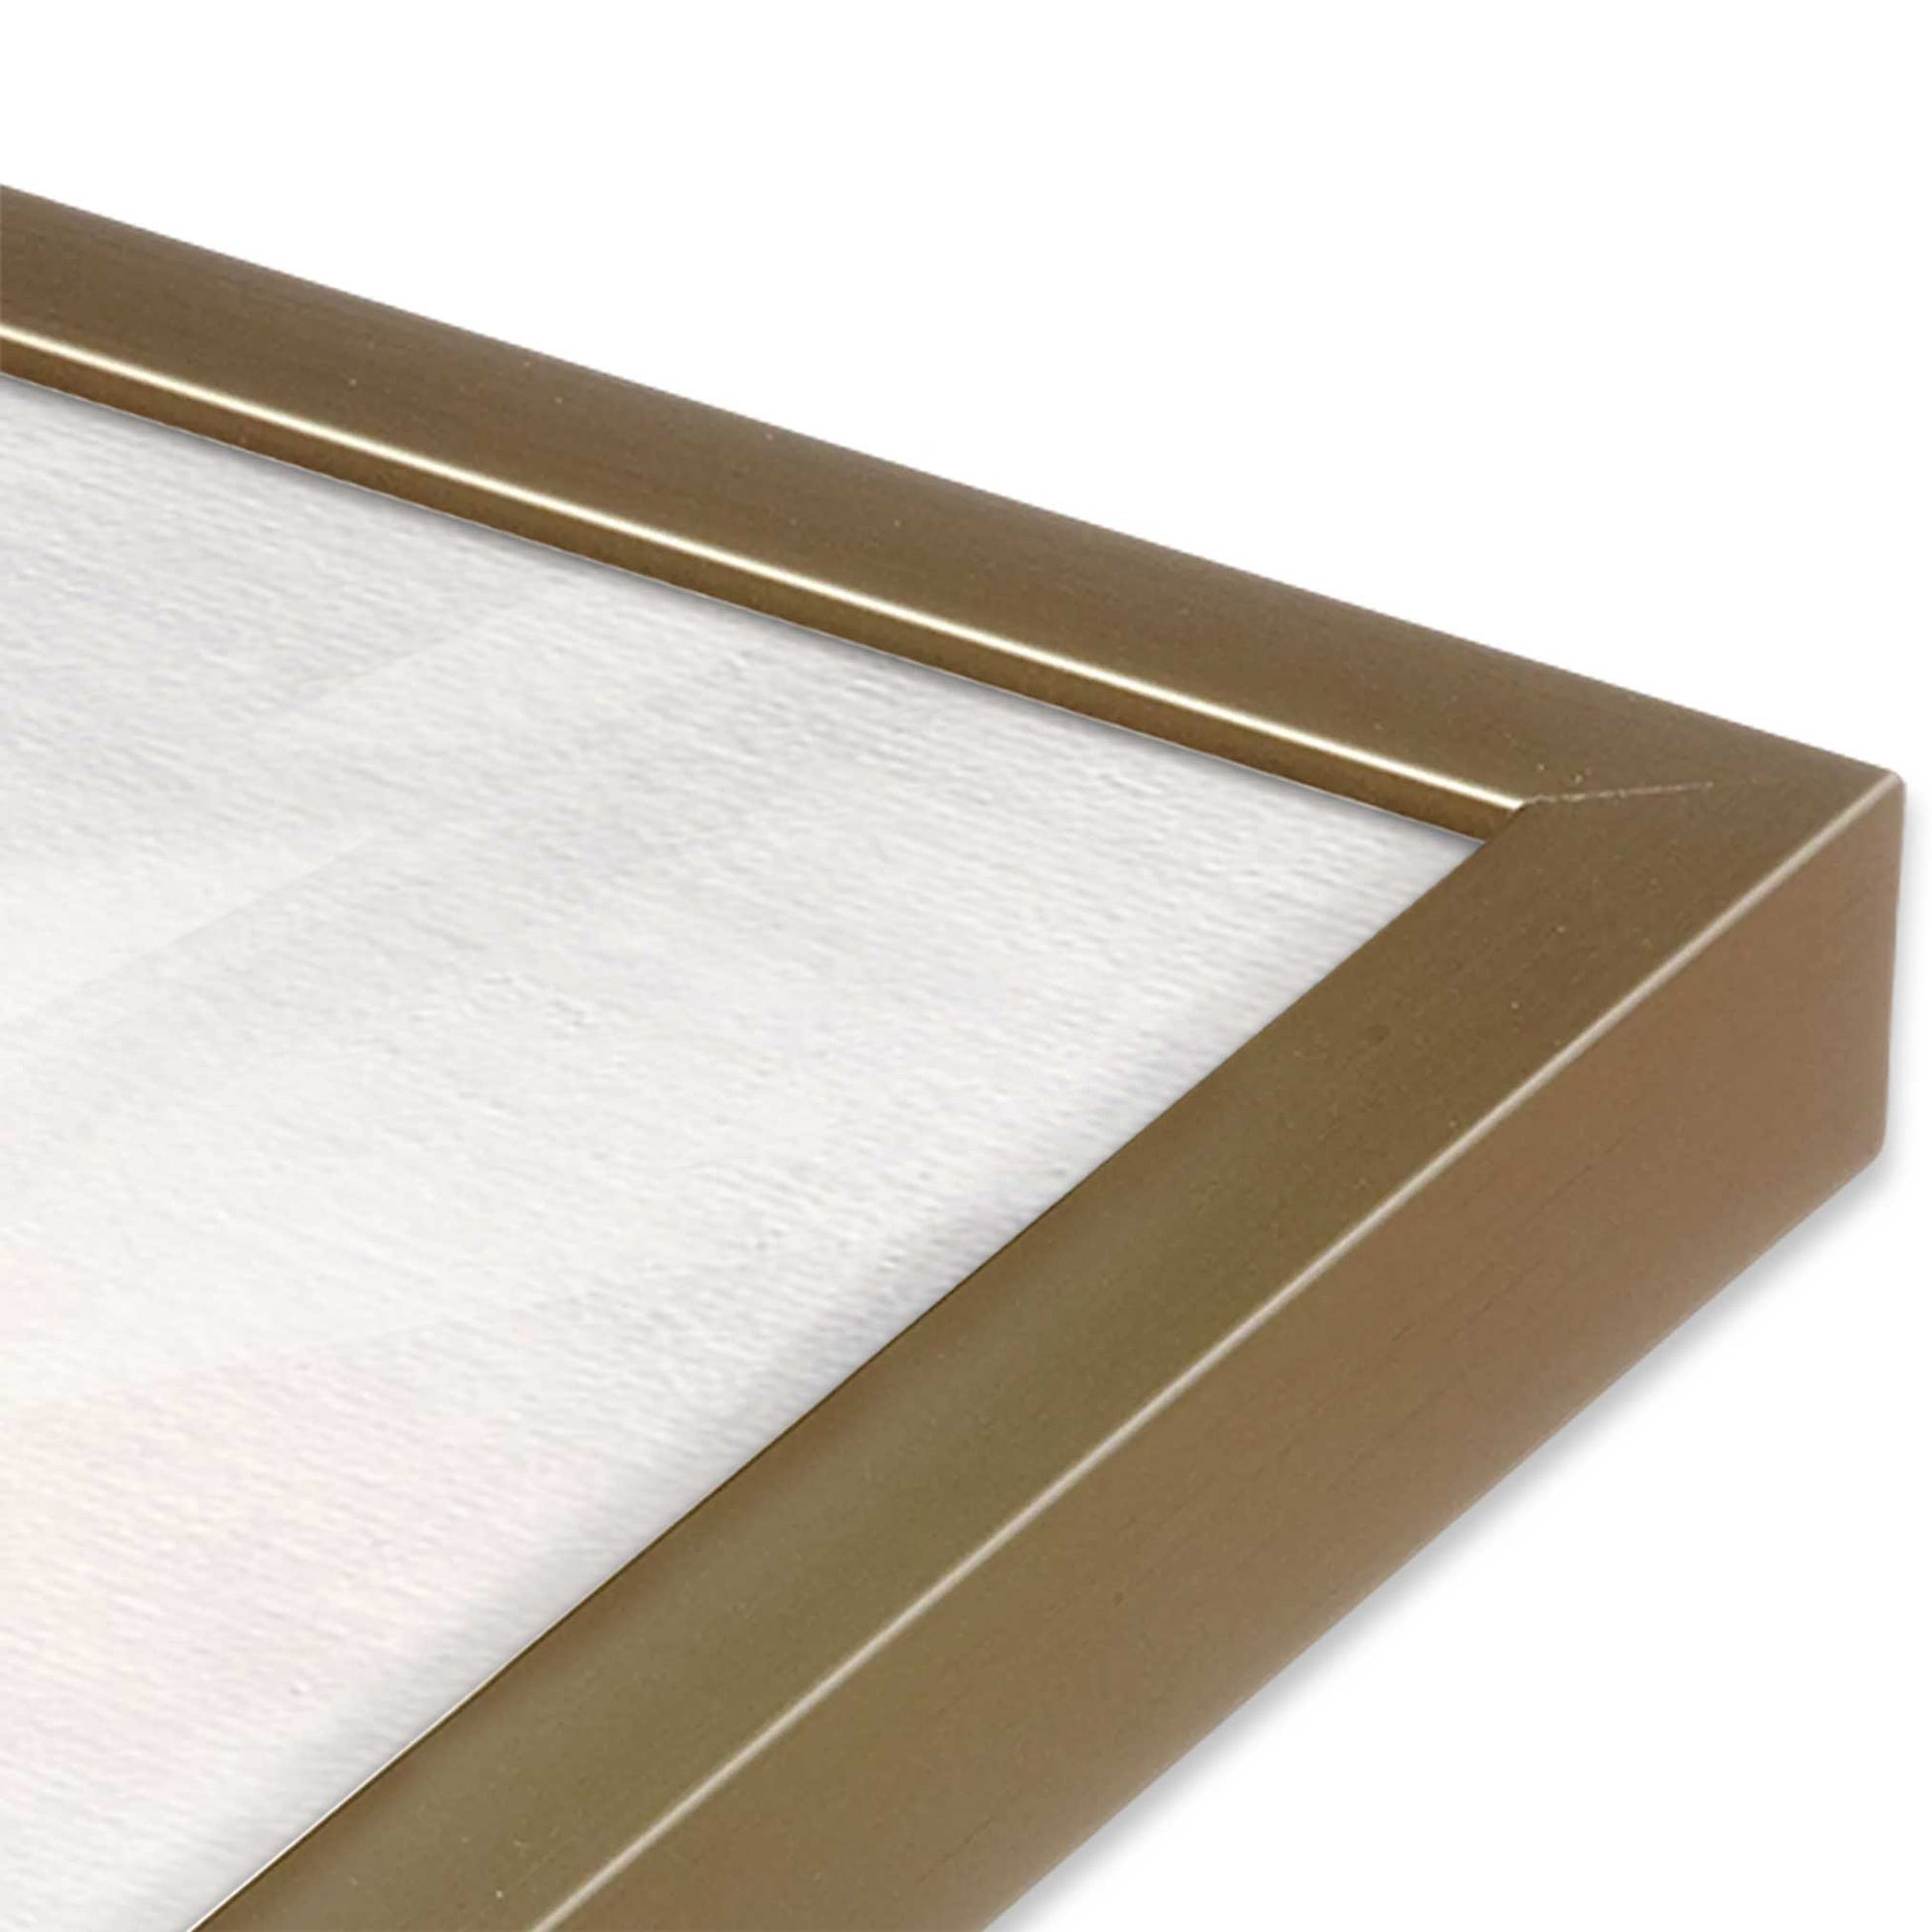 [Color:Brushed Gold], Picture of art in a Brushed Gold frame of the corner #2